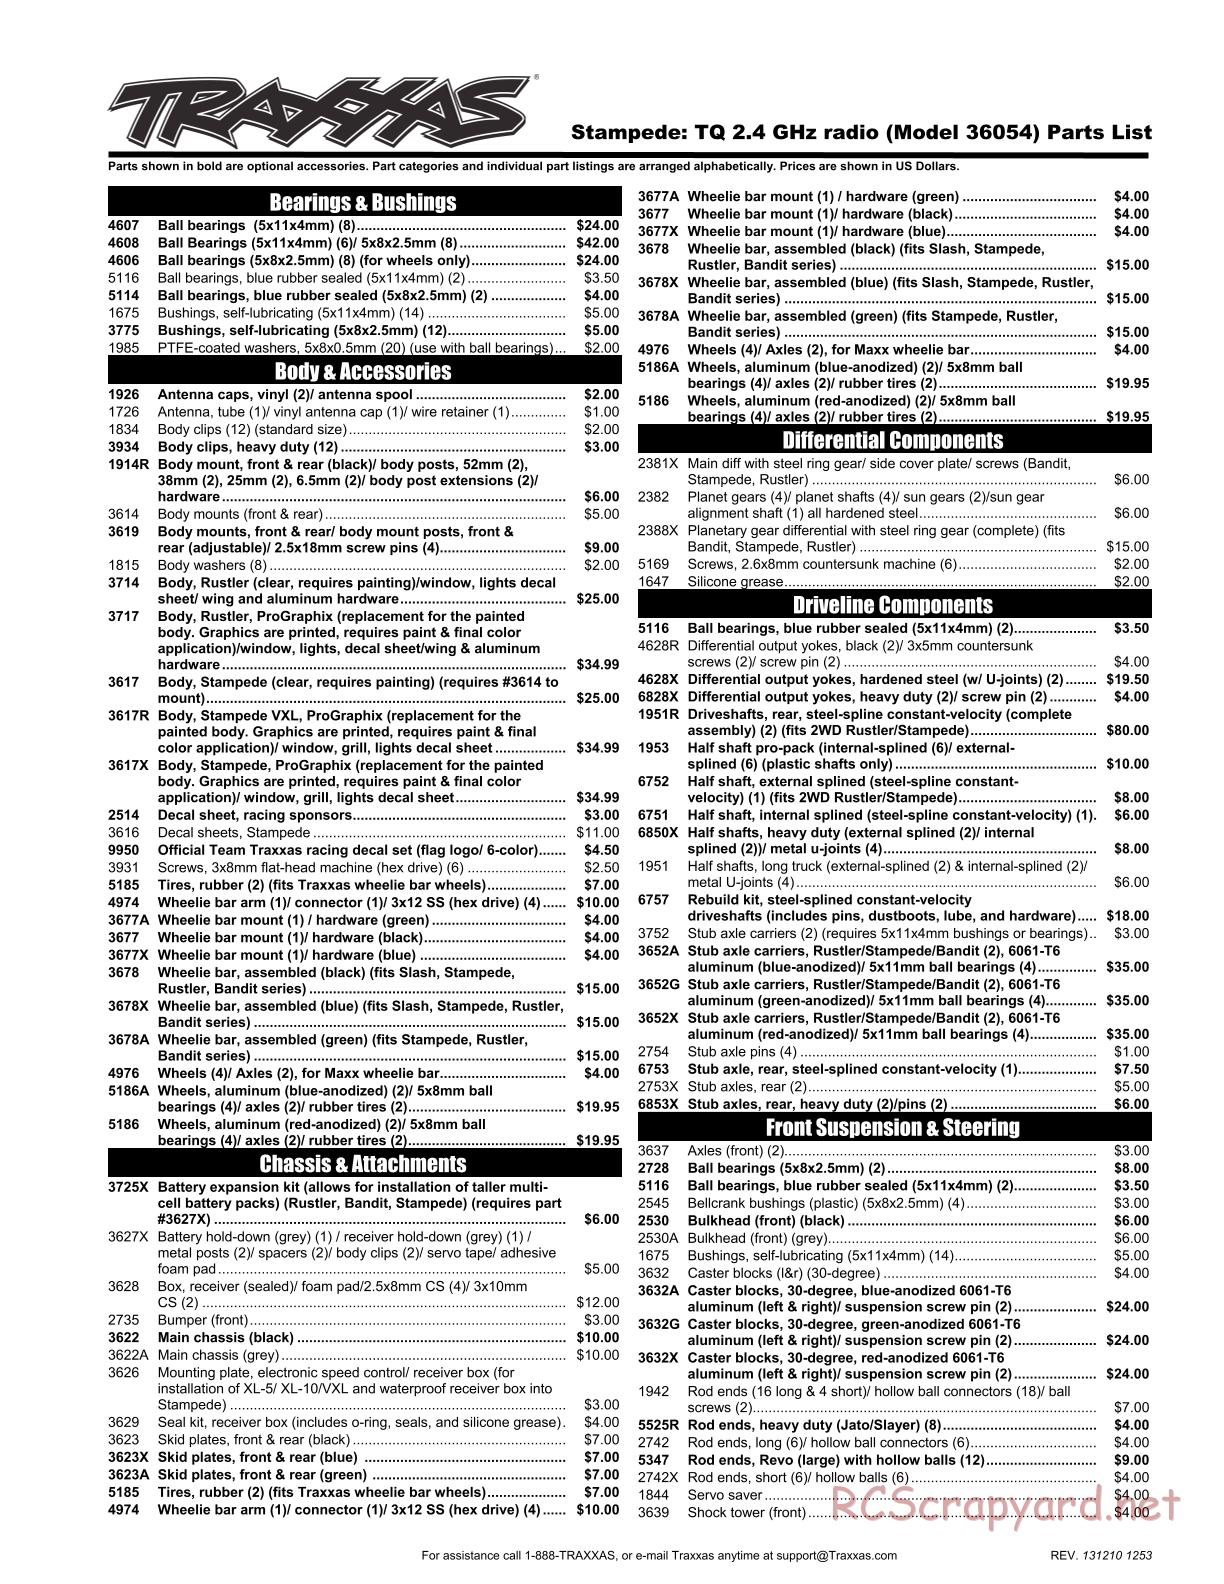 Traxxas - Stampede XL-5 - Parts List - Page 1